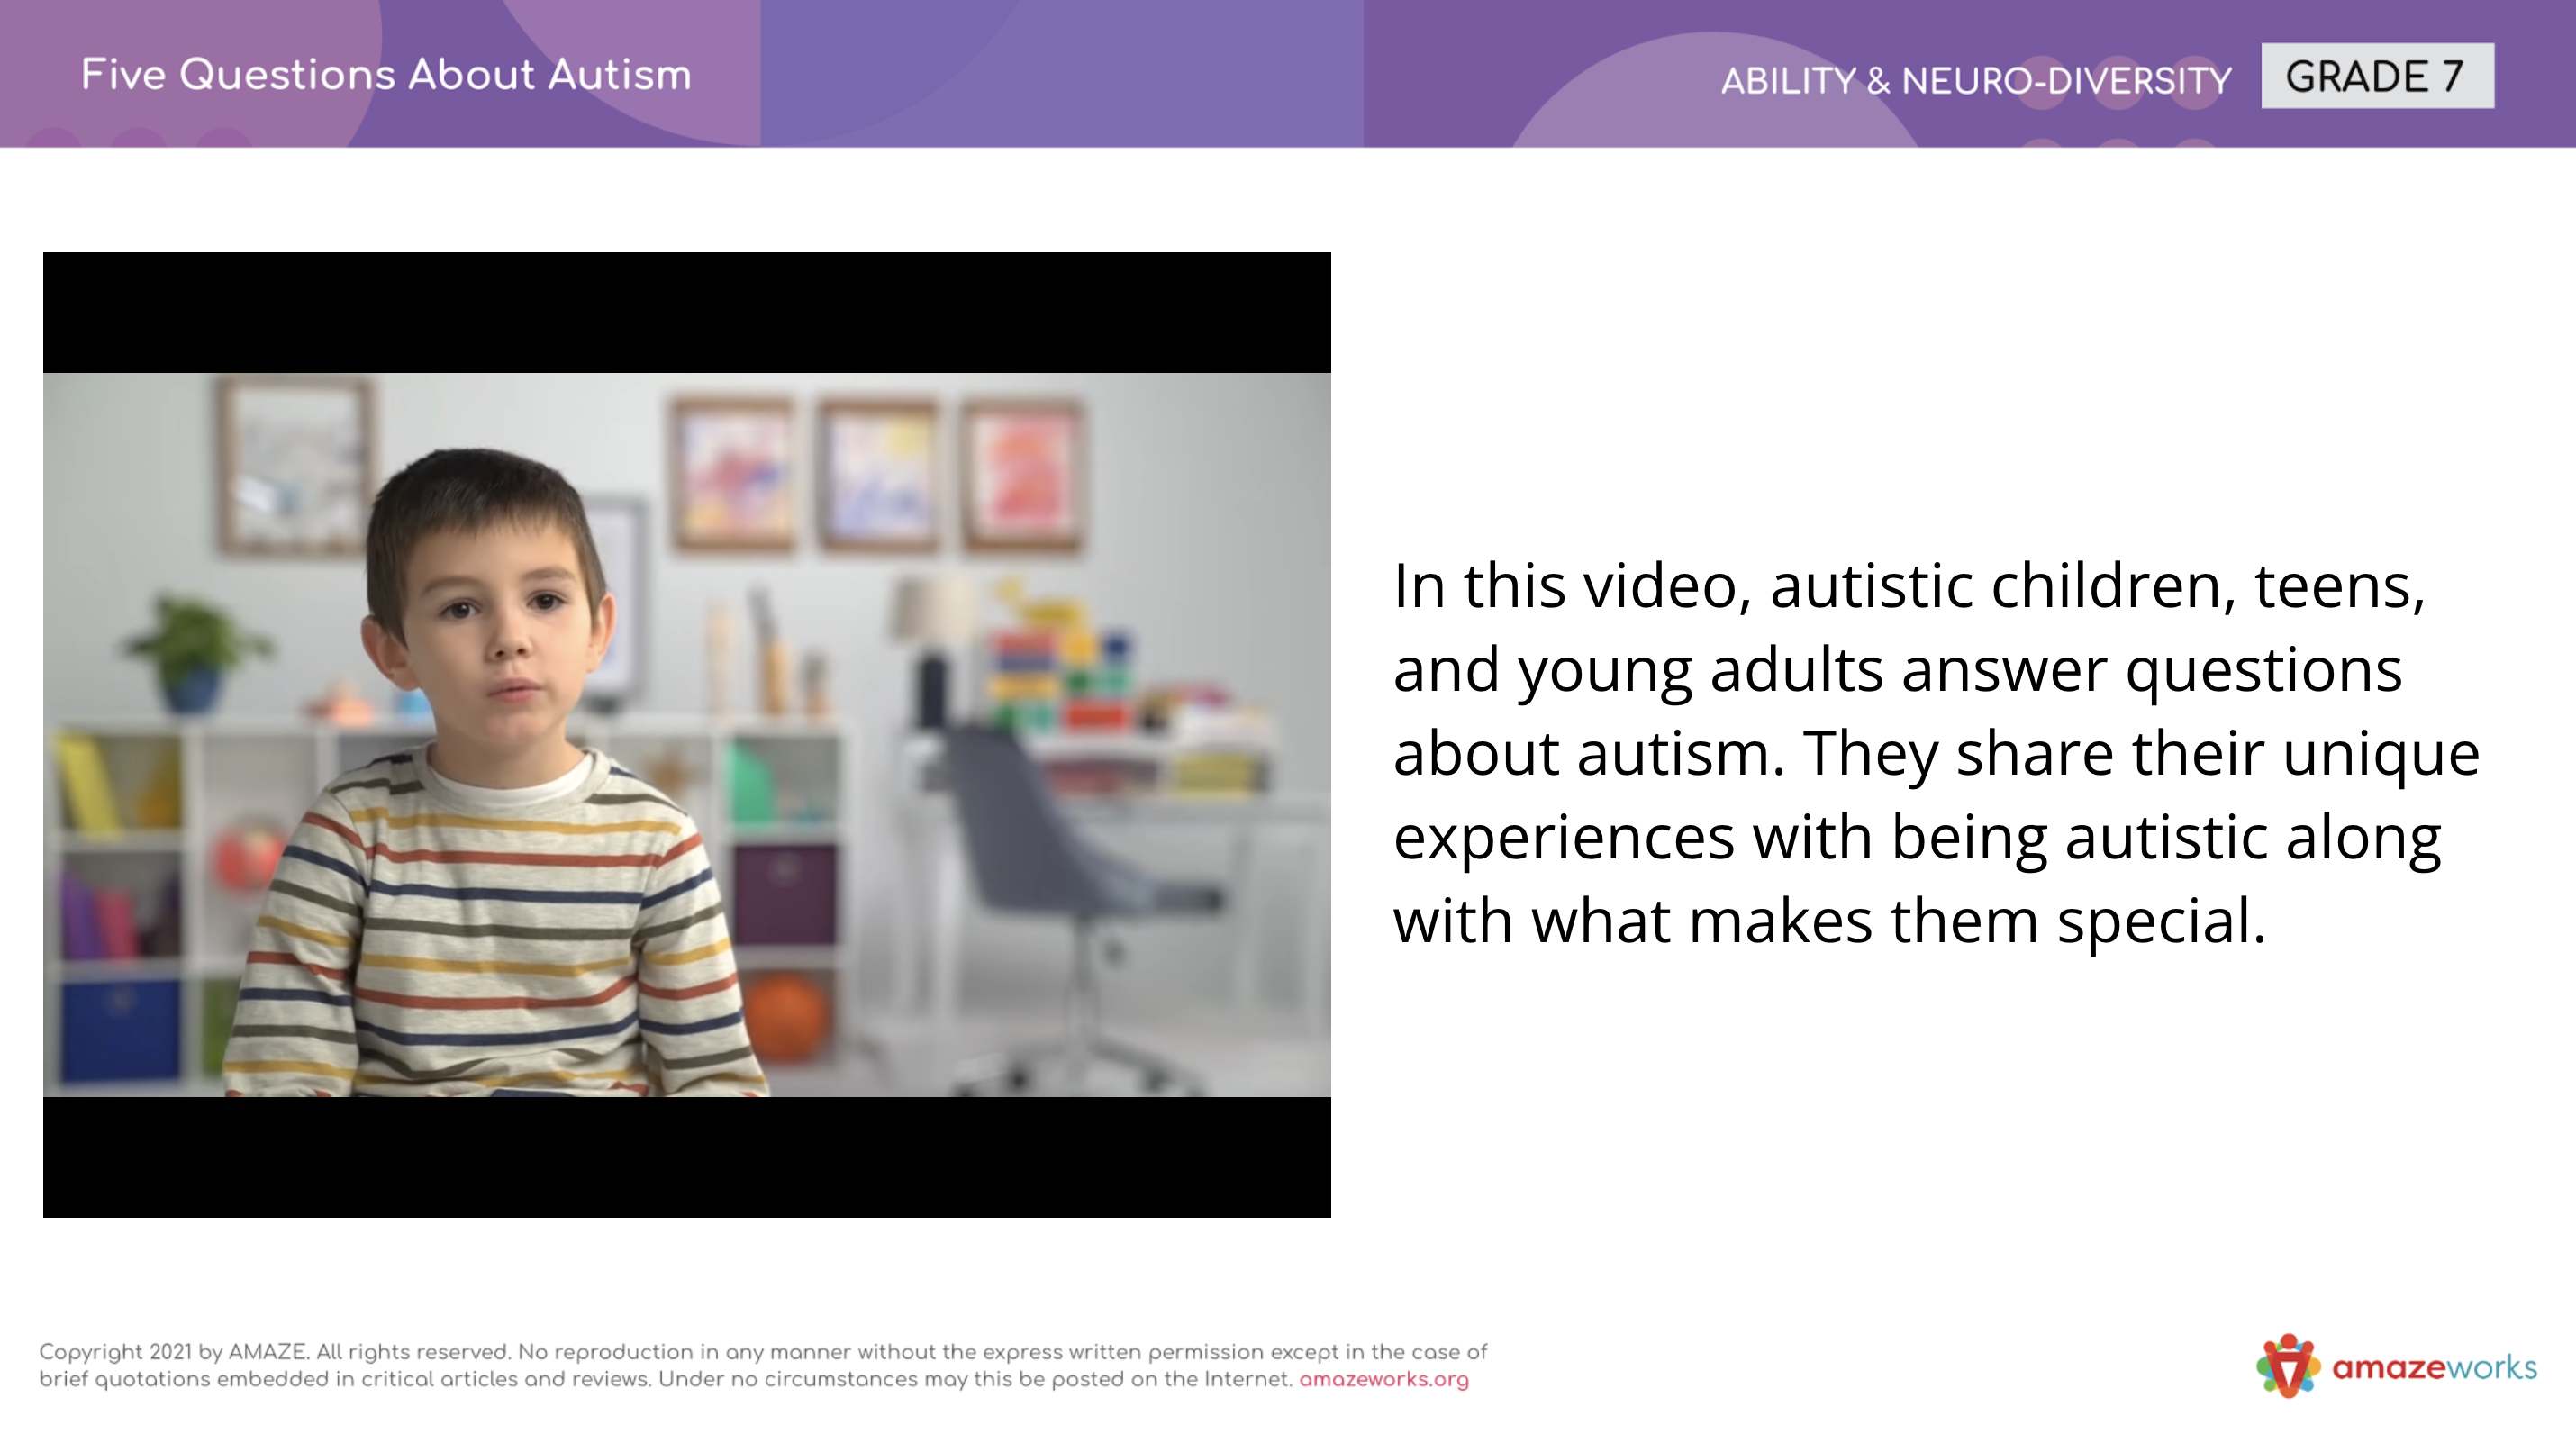 A Google slide from AmazeWorks middle school lesson, "Five Questions About Autism." A screenshot from a YouTube video of the same title pictures a child wearing a colorfully striped shirt. Text reads, "In this video, autistic children, teens, and young adults answer questions about autism. They share their unique experiences with being autistic along with what makes them special."